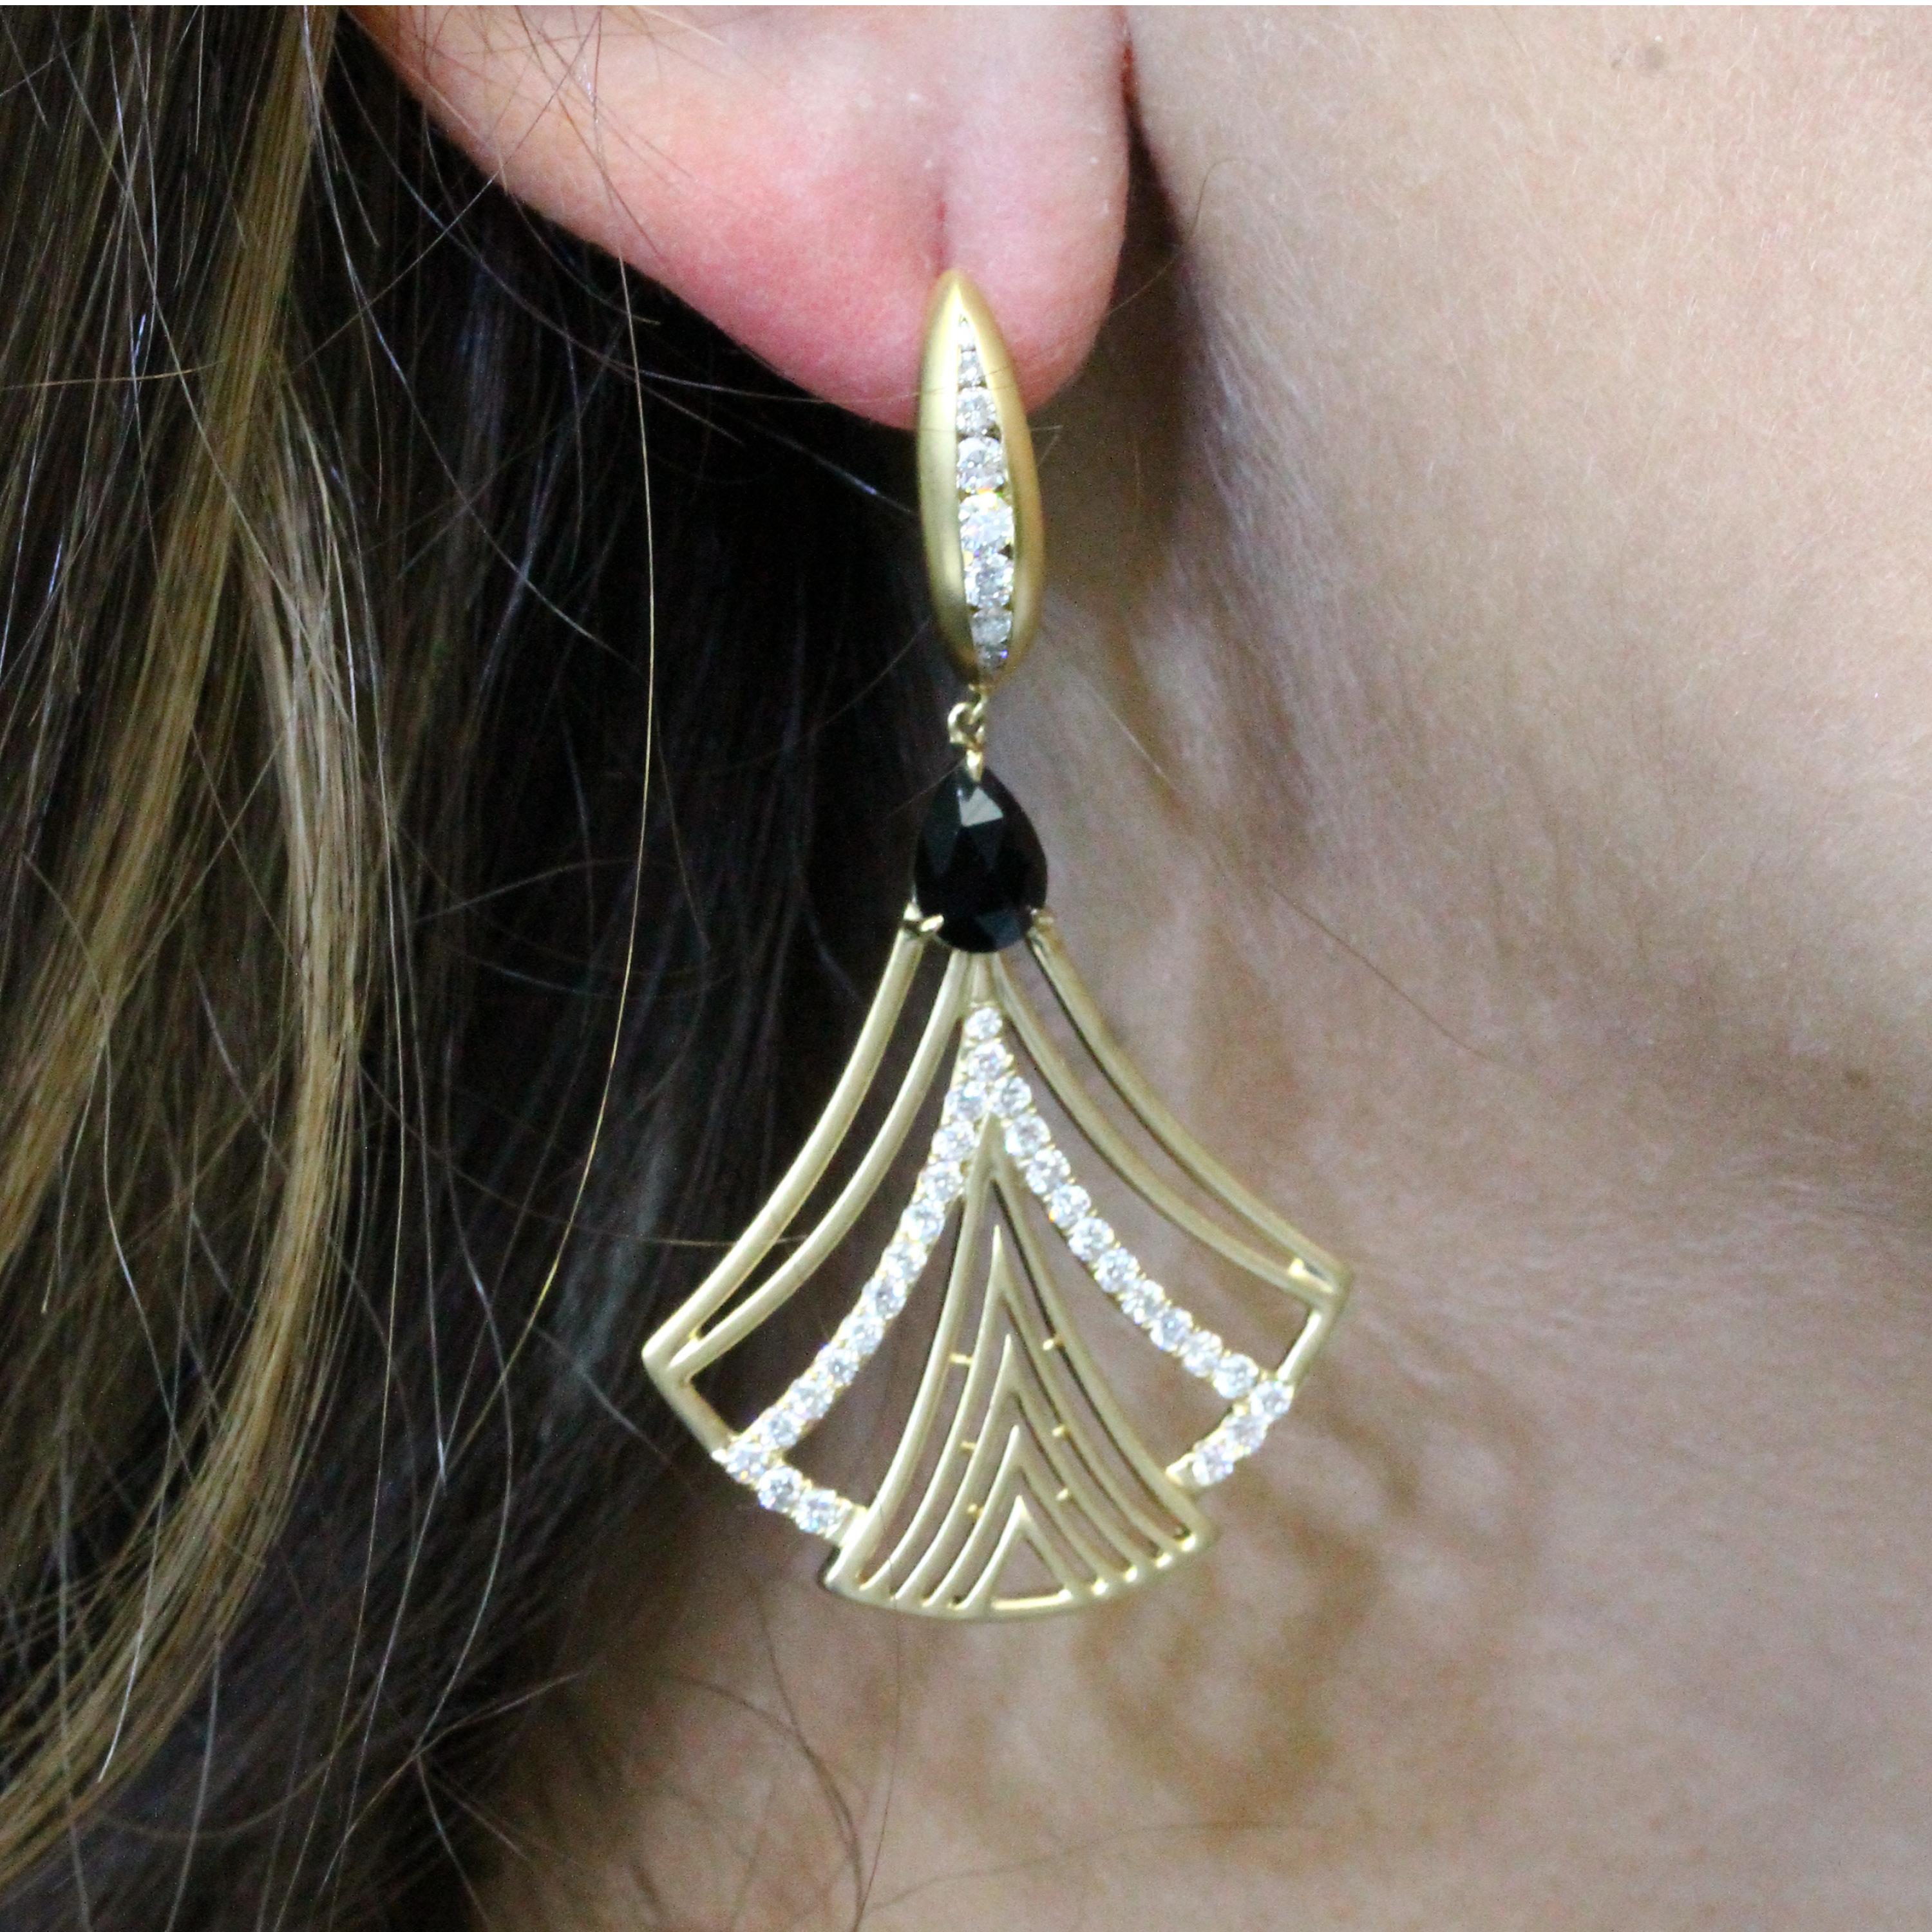 Art Deco style Earrings featuring Pear Shape Black Onyx and Diamonds, set in 18K Matte Yellow Gold. Earrings hang from Matte Gold Diamond Huggie-Tops. The Gatsby collection from Doves by Doron Paloma features exquisite art-deco inspired pieces,